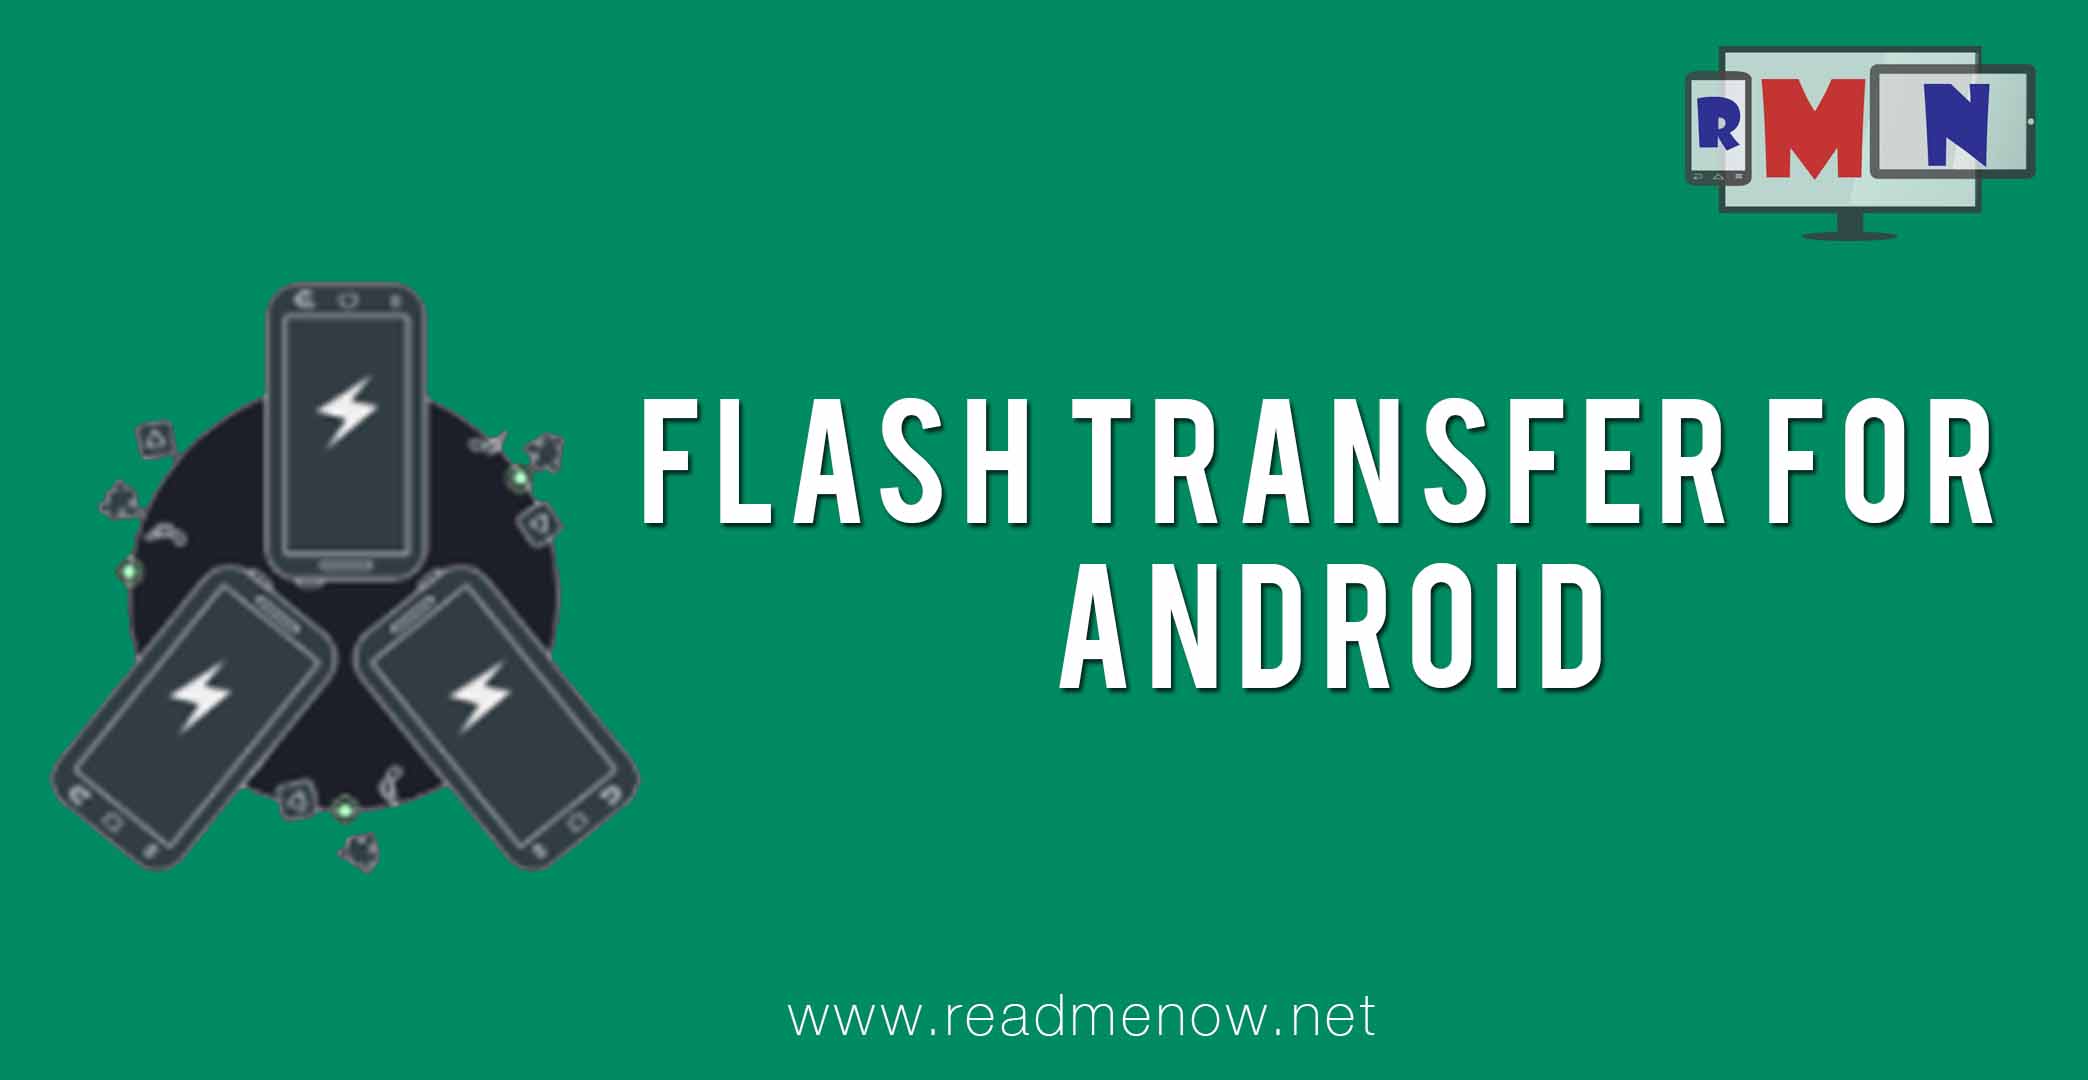 Flash Transfer by Micromax for any Android device!